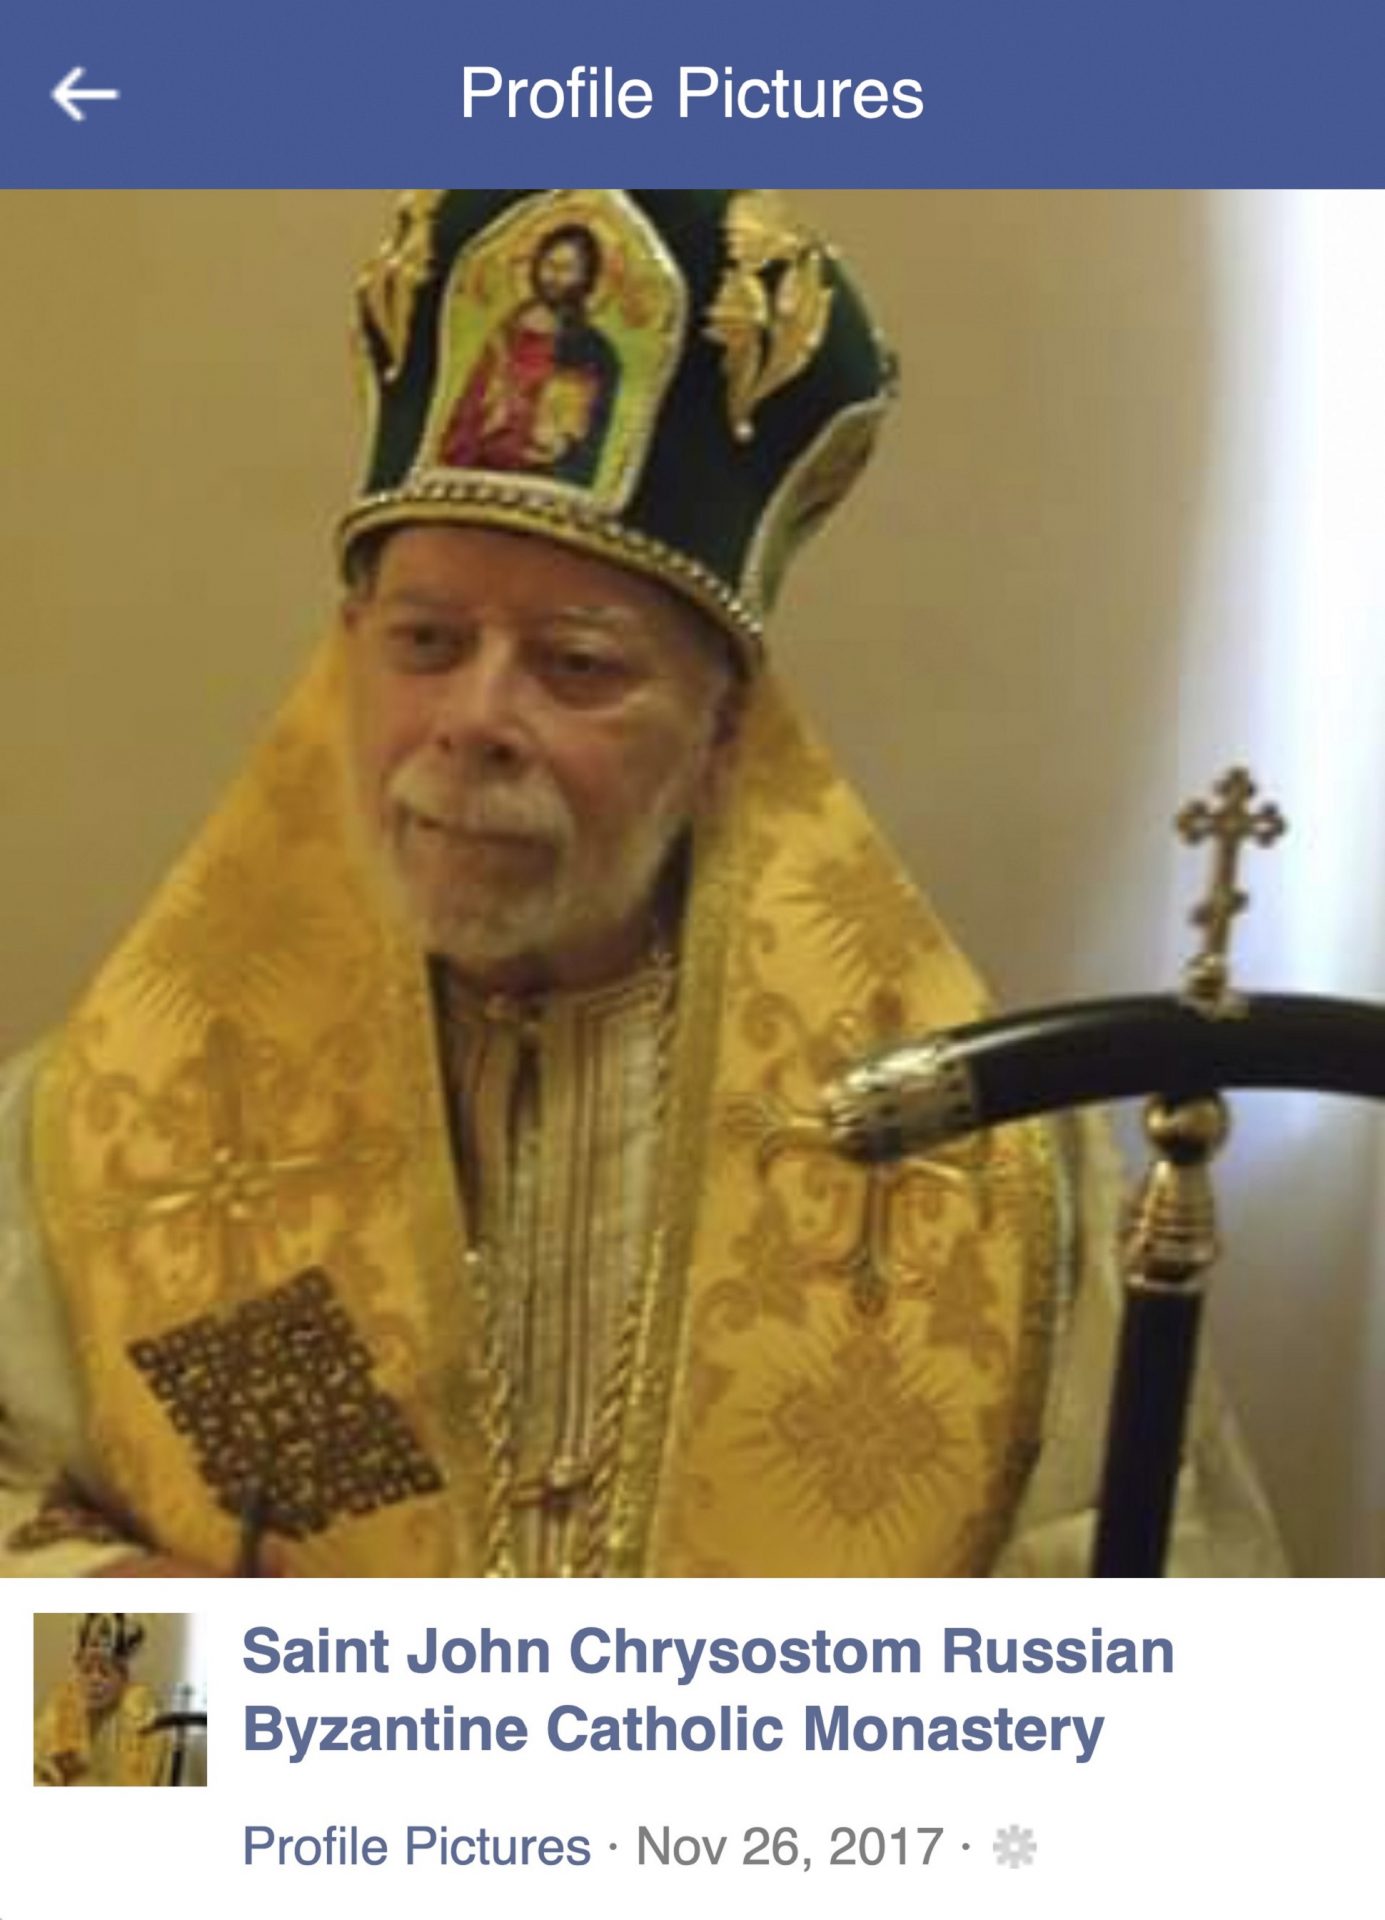 This undated photo posted to Facebook in 2017 shows Jerome Bernard Robben. Three decades earlier, Robben, a St. Louis Catholic high school teacher; and James A. Funke, a priest, went to prison for sexually abusing male students together. In 2017, this social media account identified Robben _ wearing a crown and gold vestments _ as the leader of a Russian Byzantine order raising money to build a monastery in Nevada.